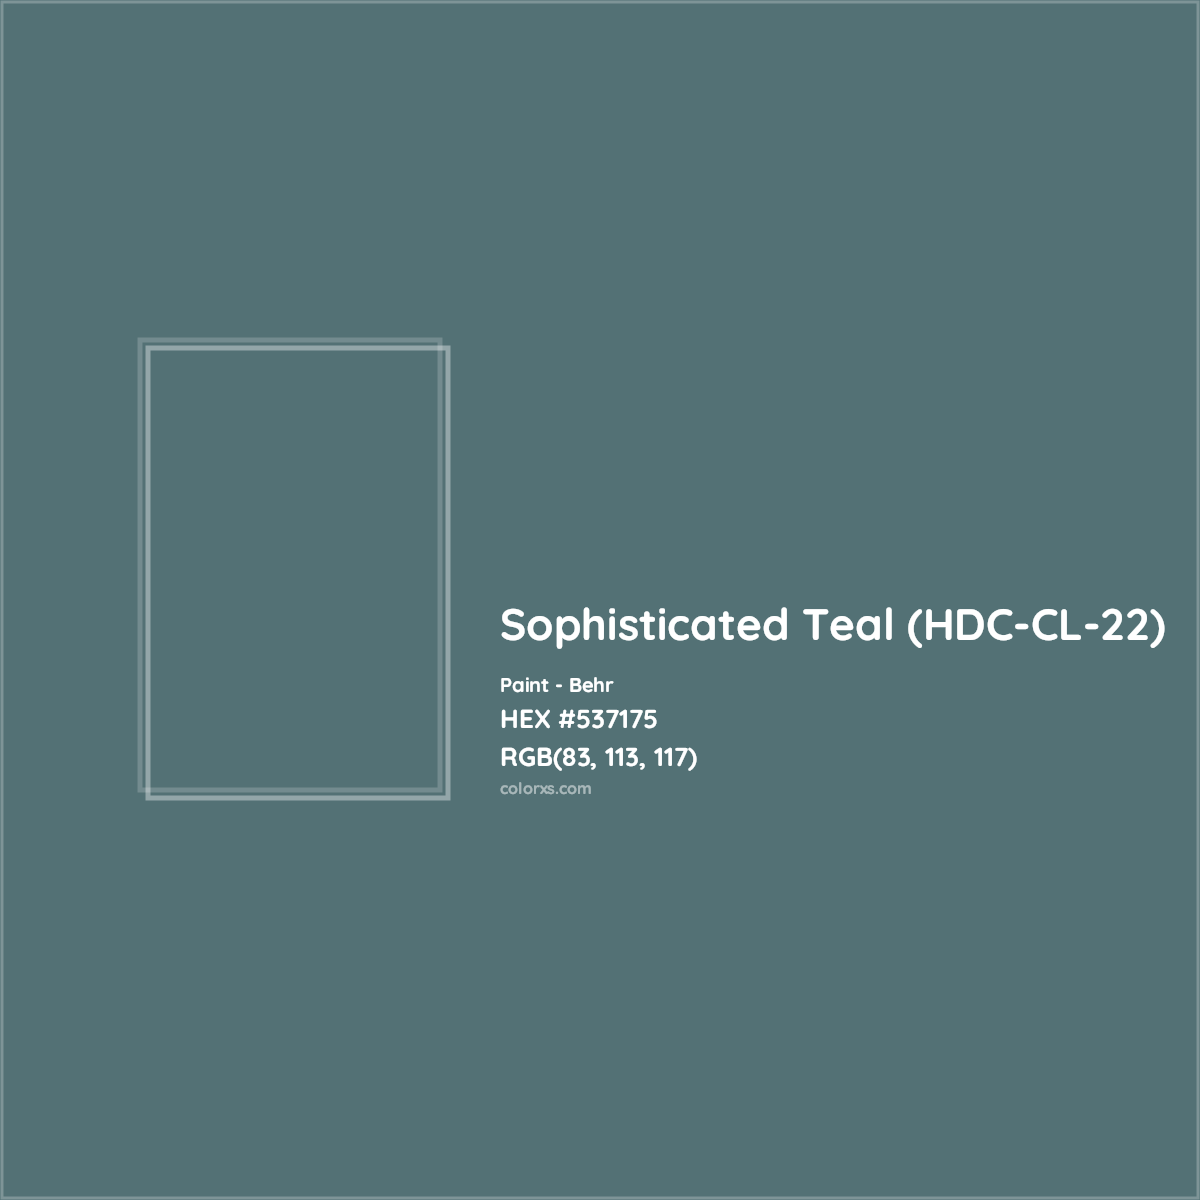 HEX #537175 Sophisticated Teal (HDC-CL-22) Paint Behr - Color Code